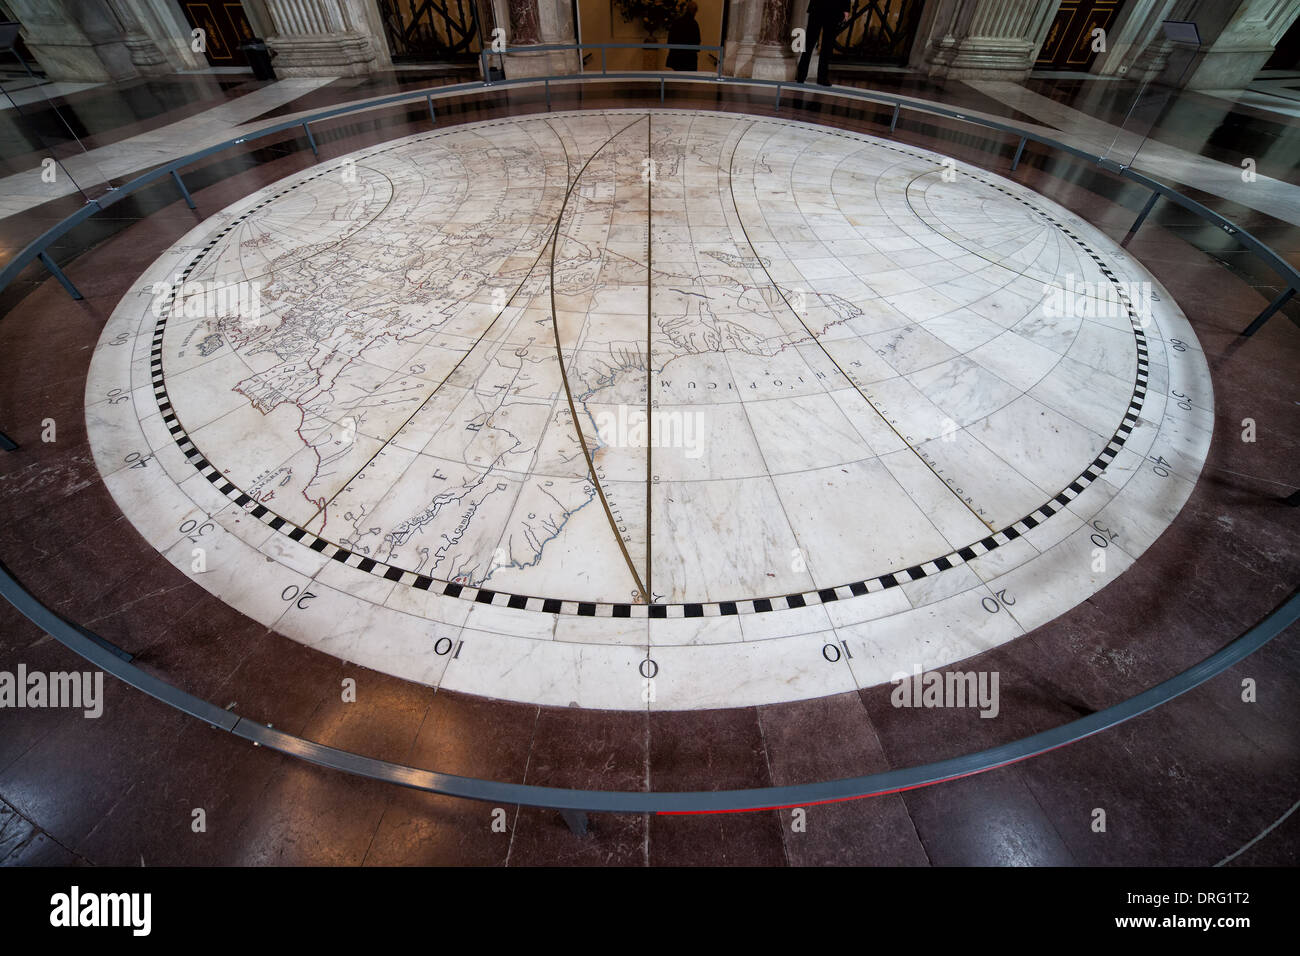 Marble floor in Citizens' Hall, interior of the Royal Palace (Dutch: Koninklijk Paleis) in Amsterdam, Holland, the Netherlands. Stock Photo